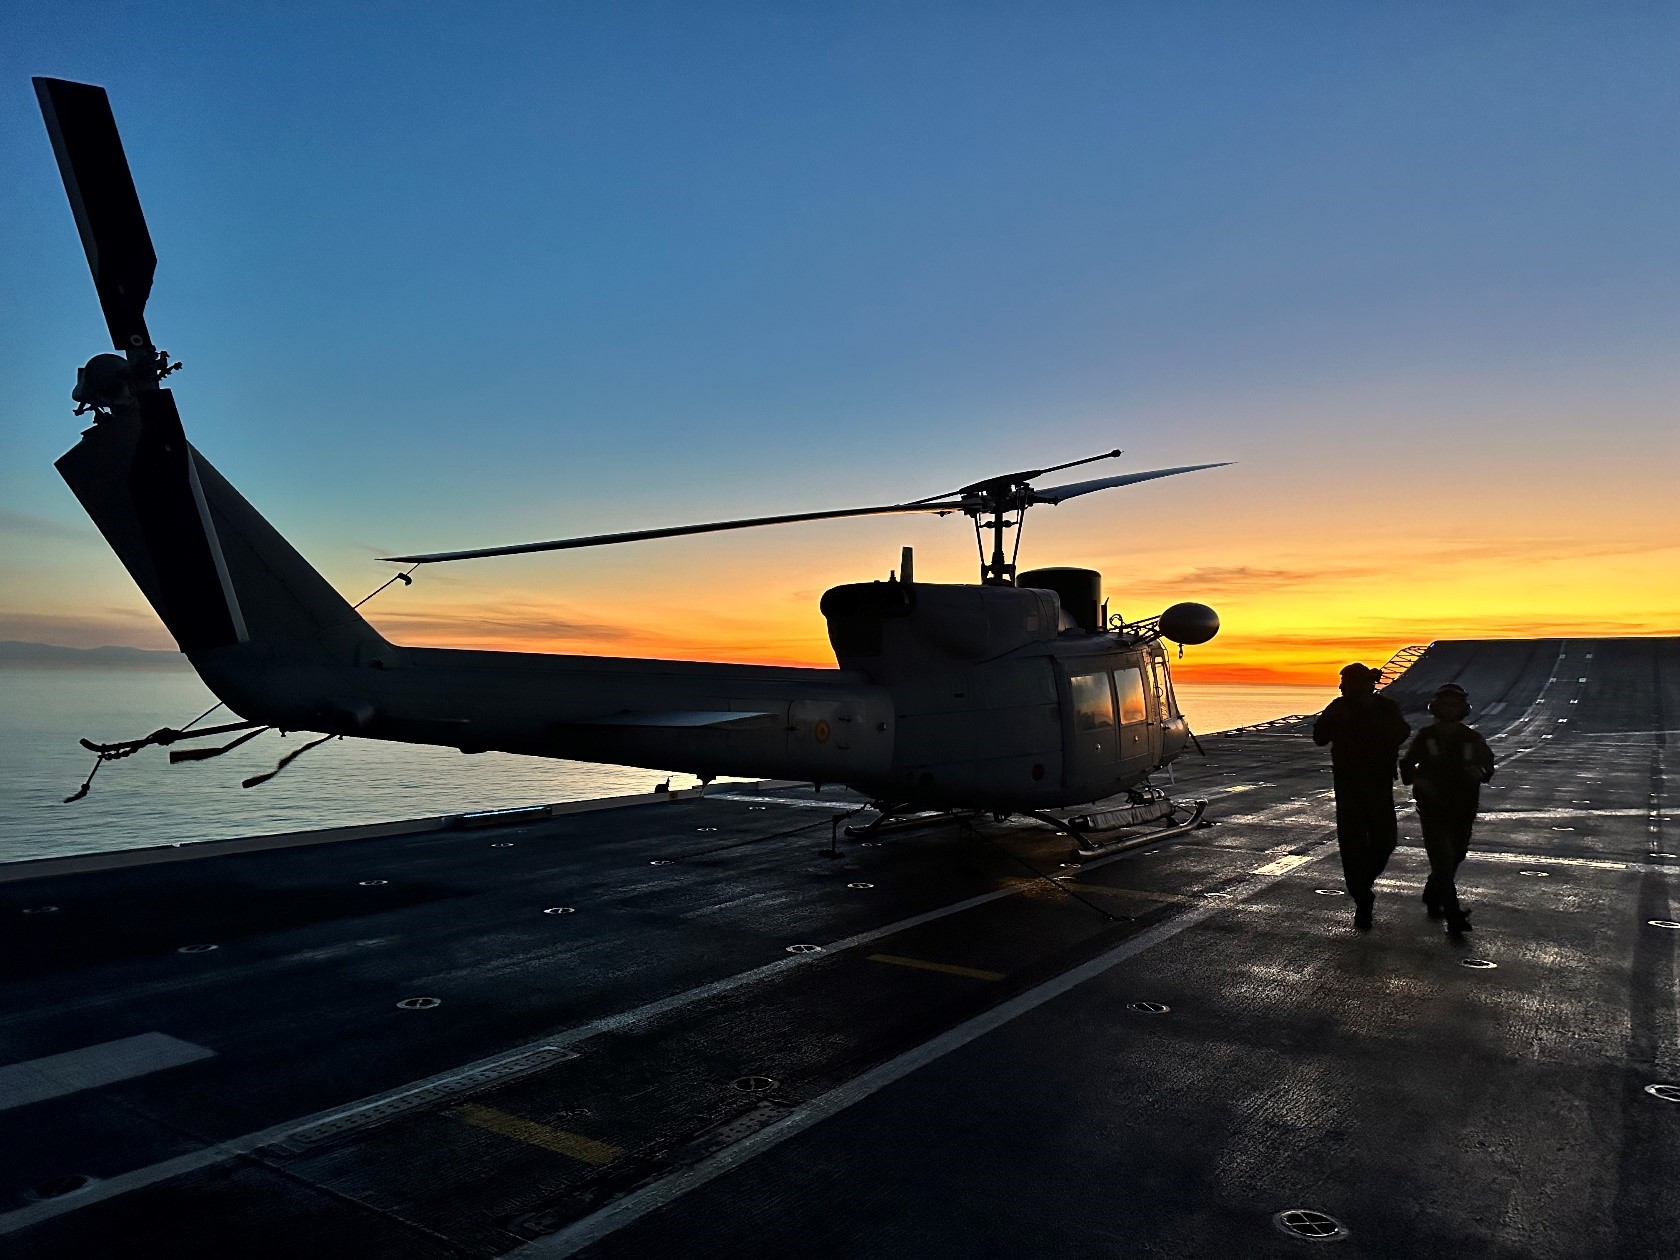 Helicopter 'Gato' belonging to the 3rd Squadron on the flight deck of the 'Juan Carlos I'.